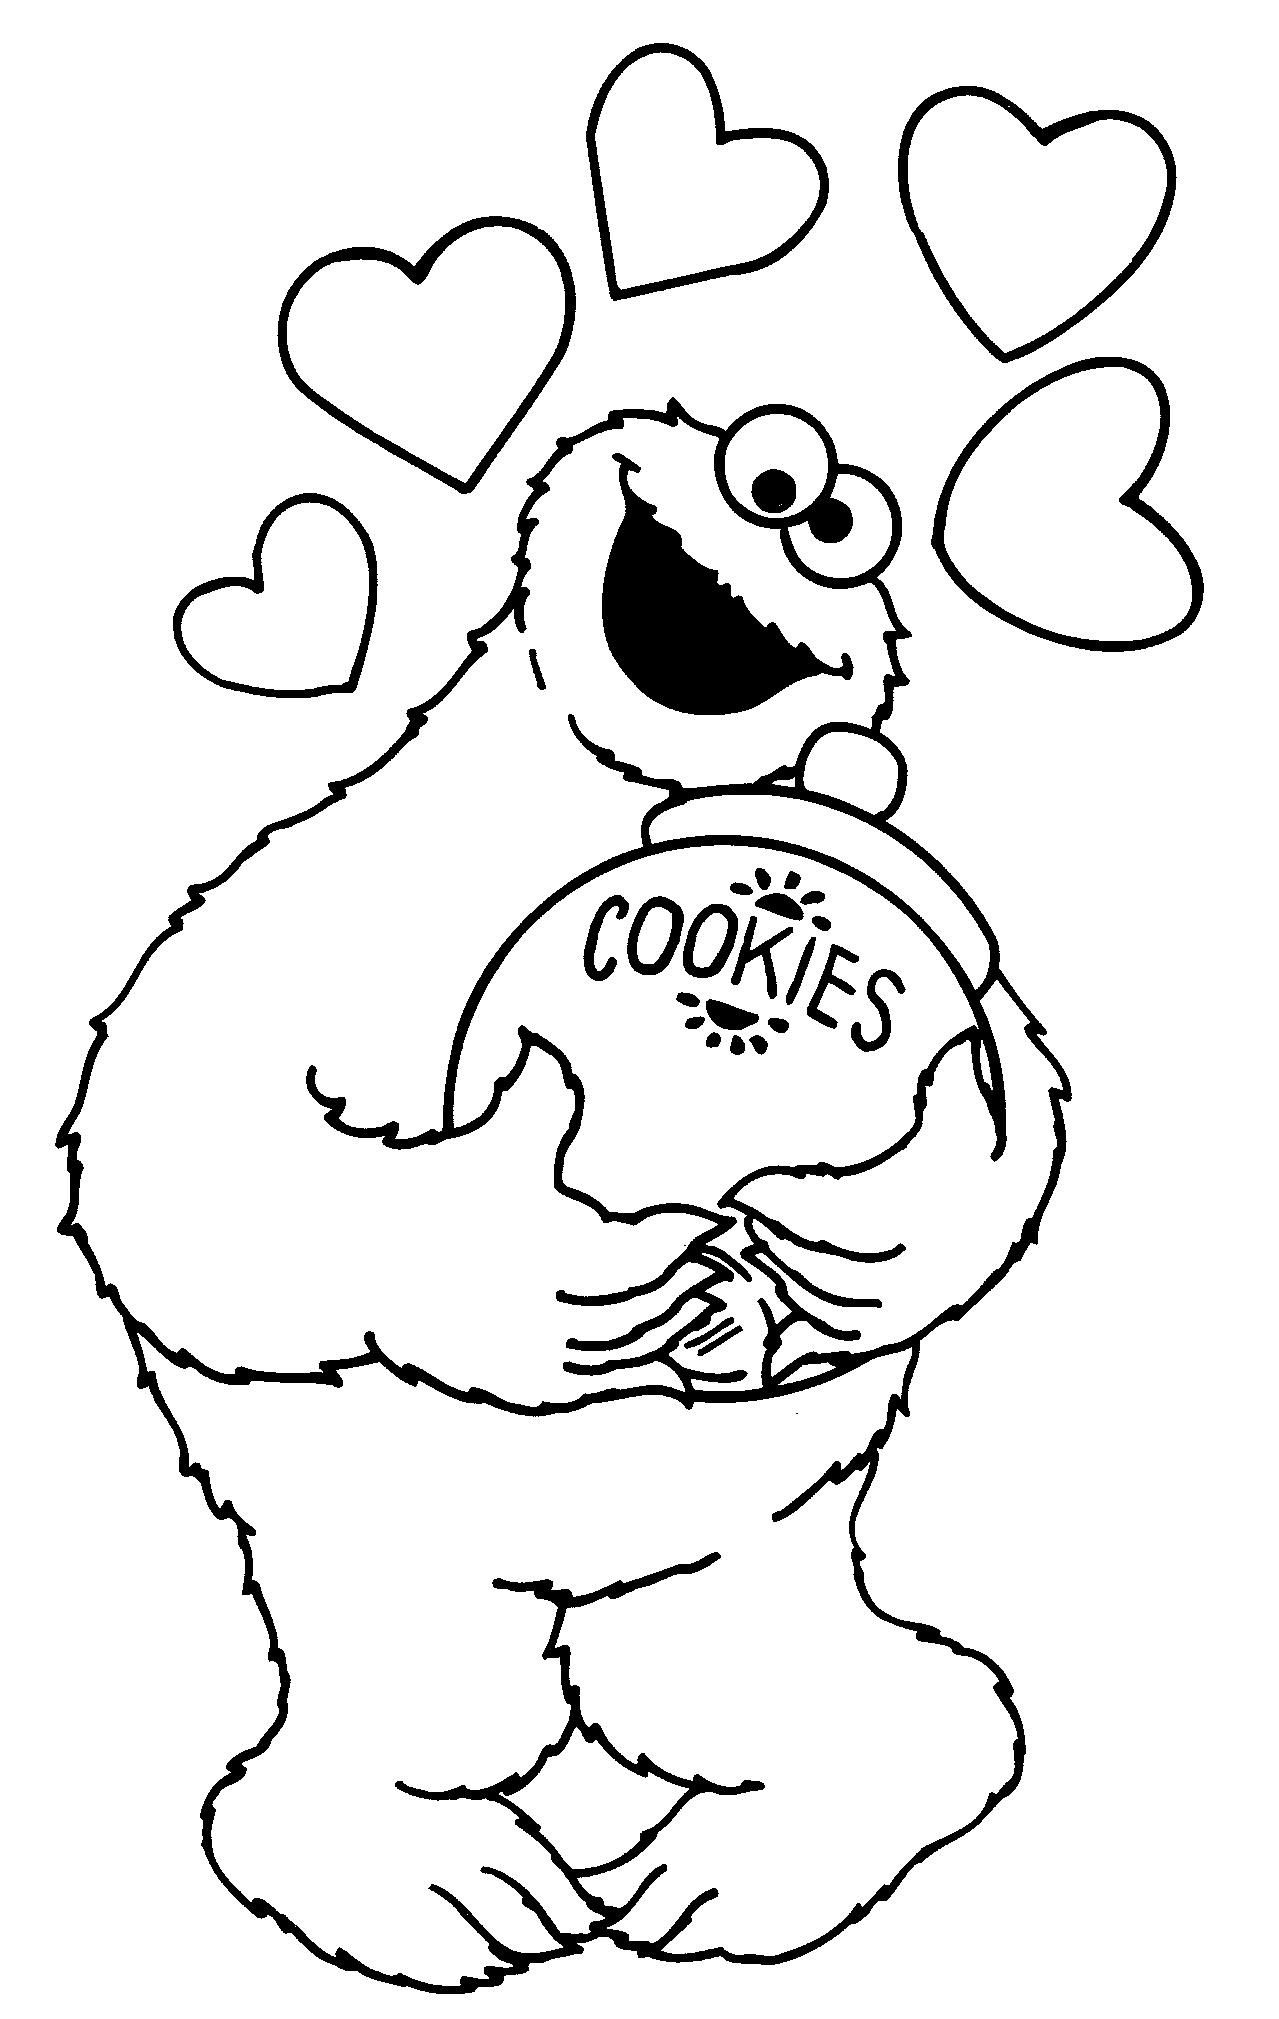 Cookie Monster / Cookie Jar (Coloring Pages) | Coloring Pages - Free Printable Sesame Street Coloring Pages